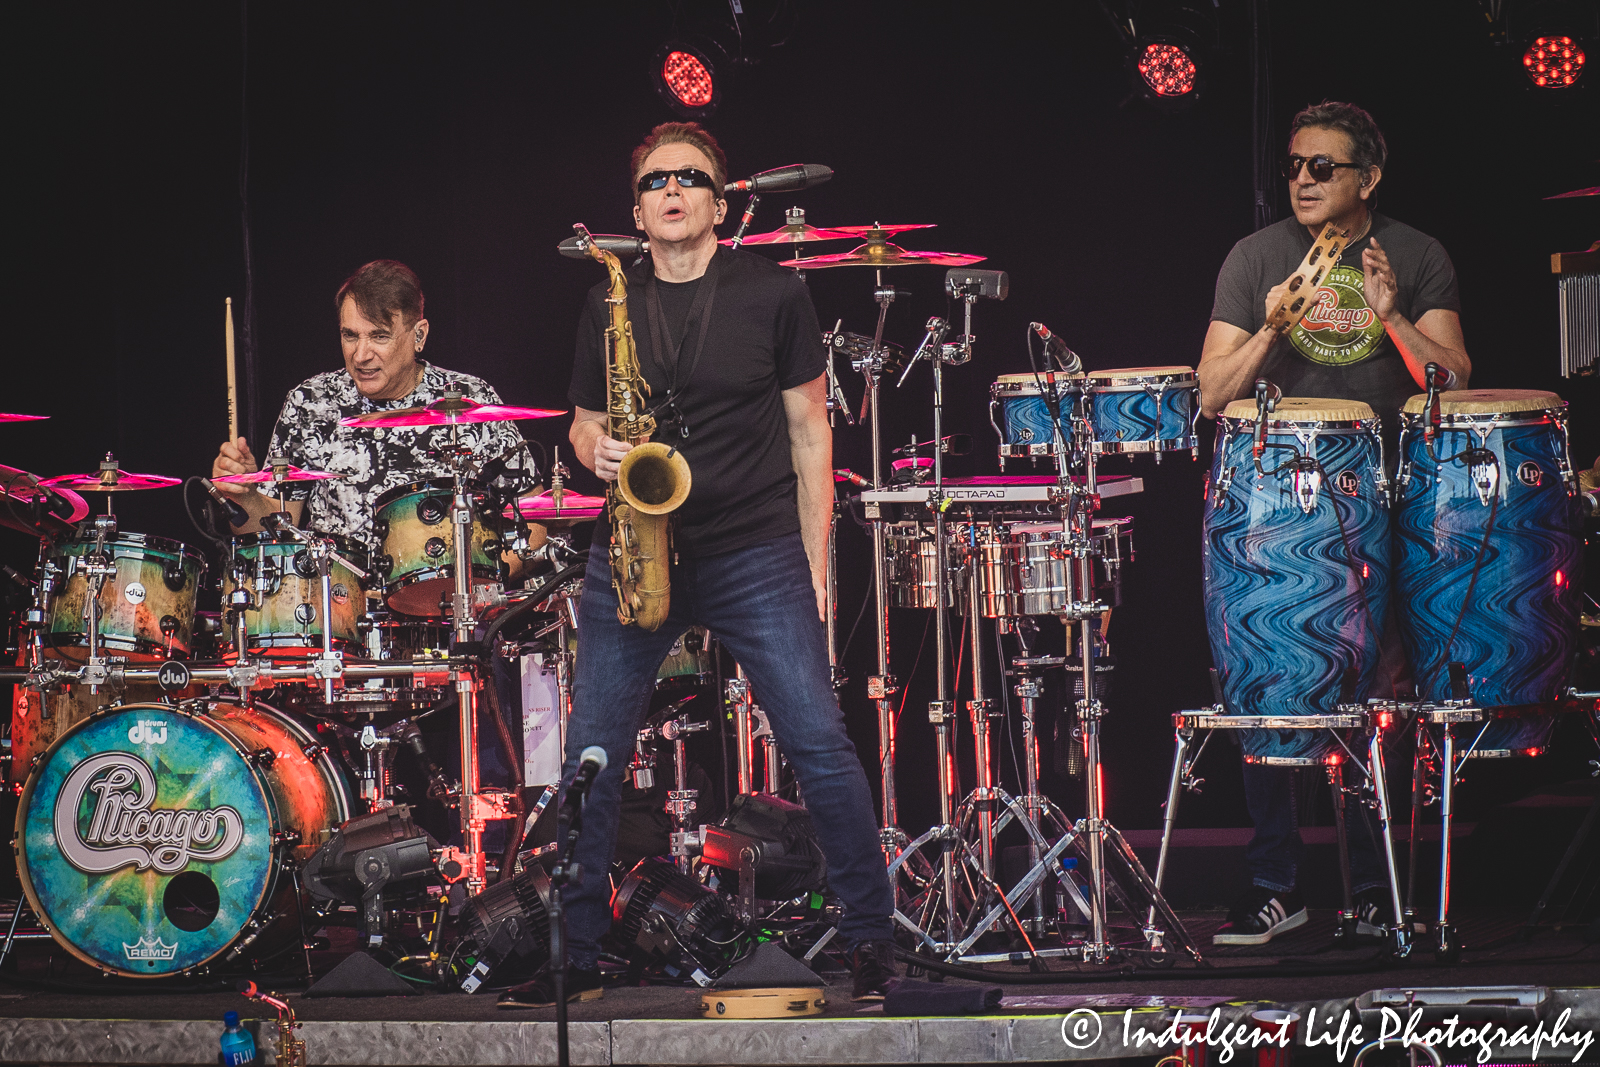 Chicago band touring members Ray Herrmann (saxophone), Walfredo Reyes, Jr. (drums) and Ramon Yslas (percussion) performing together at Starlight Theatre in Kansas City, MO on May 26, 2023.